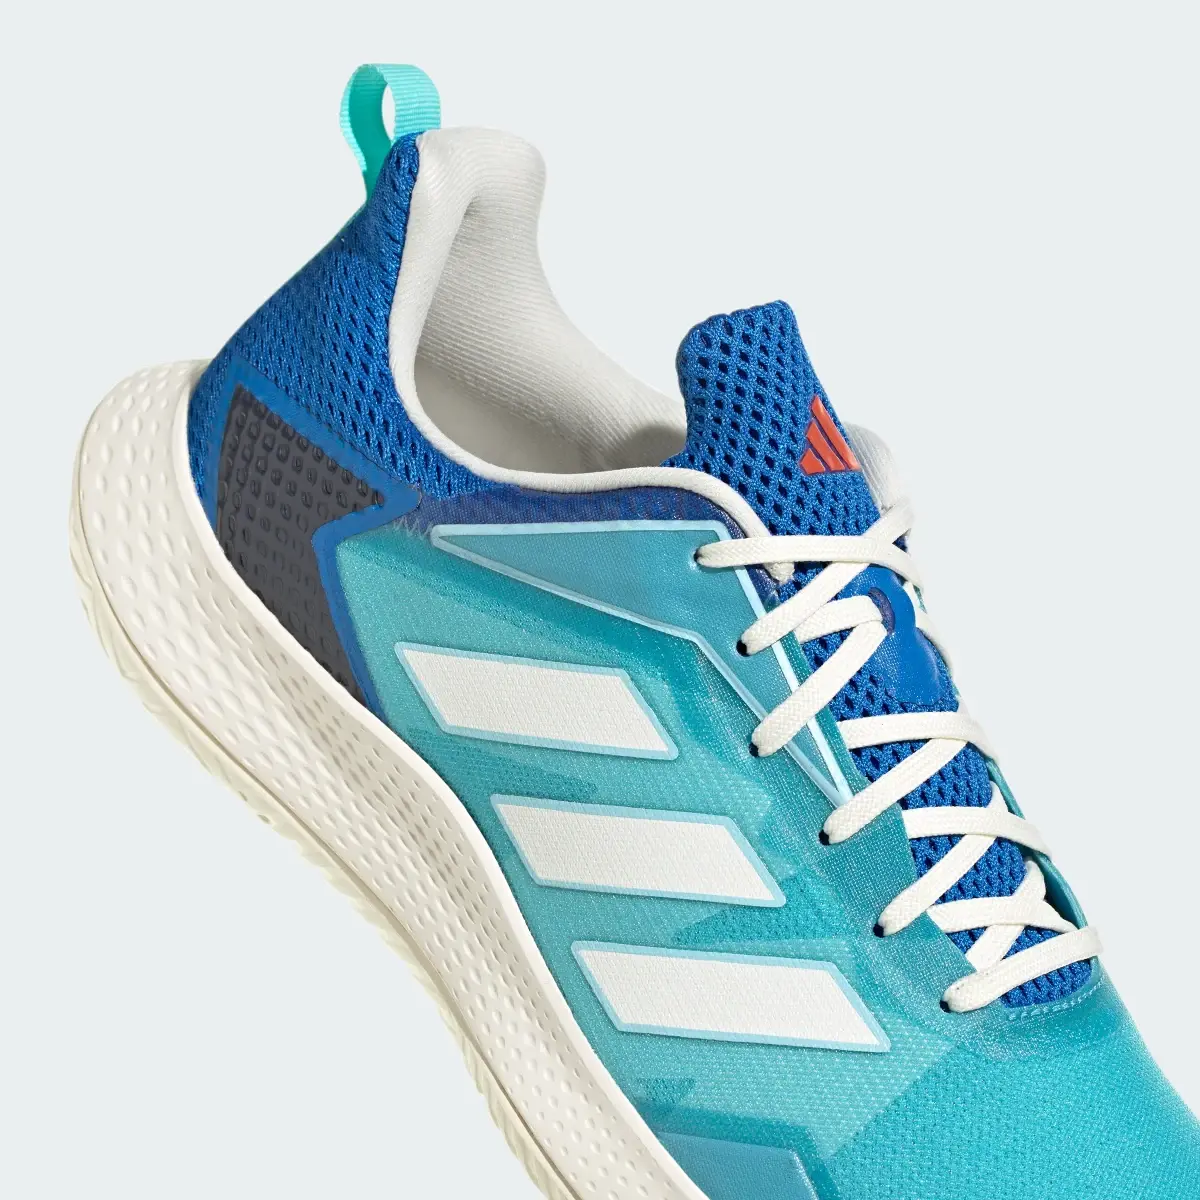 Adidas Defiant Speed Tennis Shoes. 3